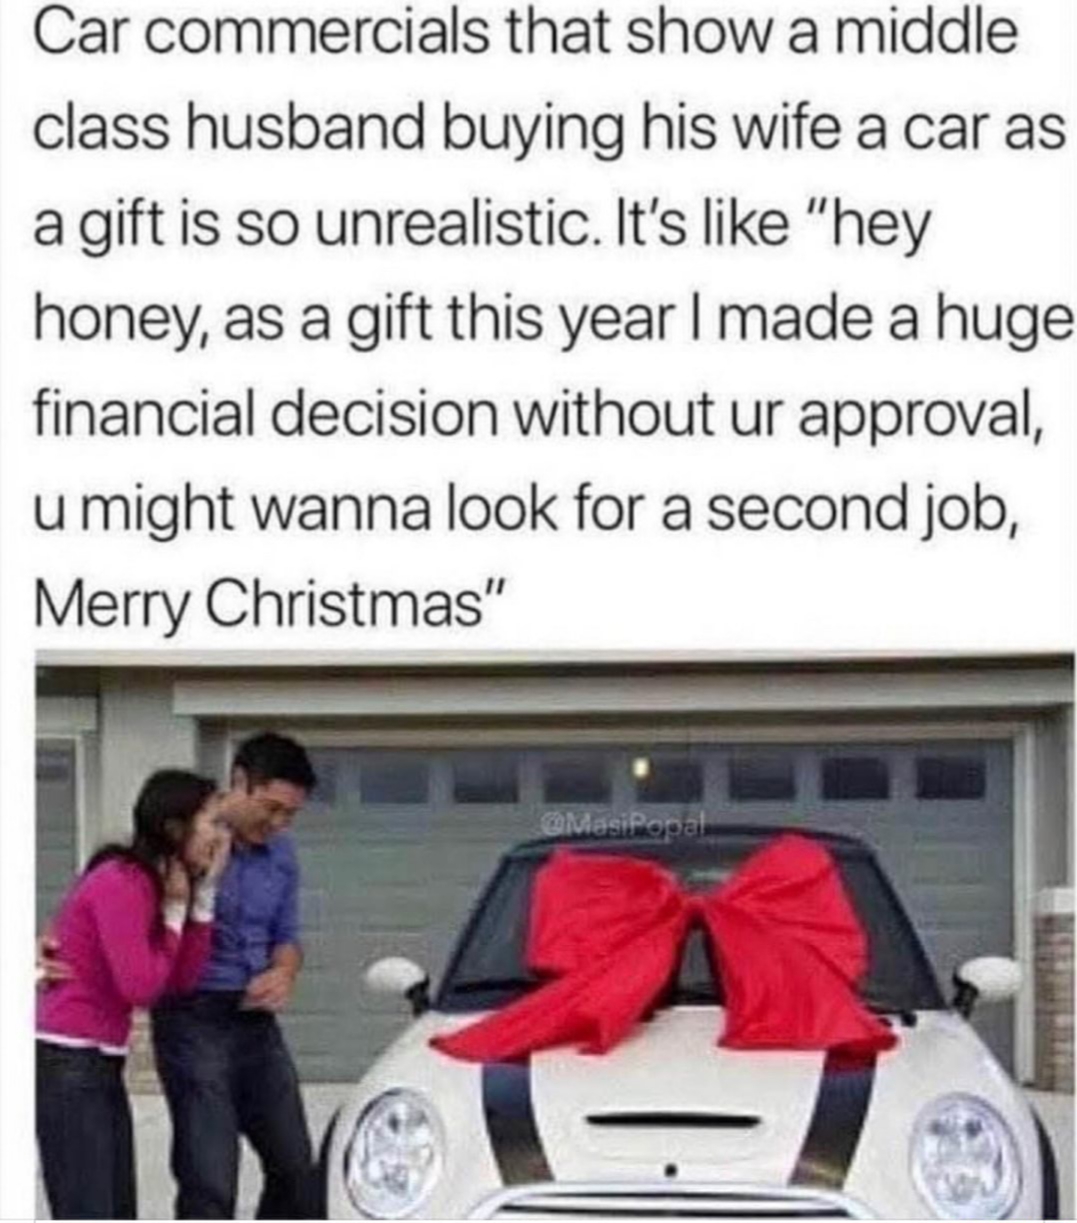 unrealistic car commercials - Car commercials that show a middle class husband buying his wife a car as a gift is so unrealistic. It's "hey honey, as a gift this year I made a huge financial decision without ur approval, u might wanna look for a second jo